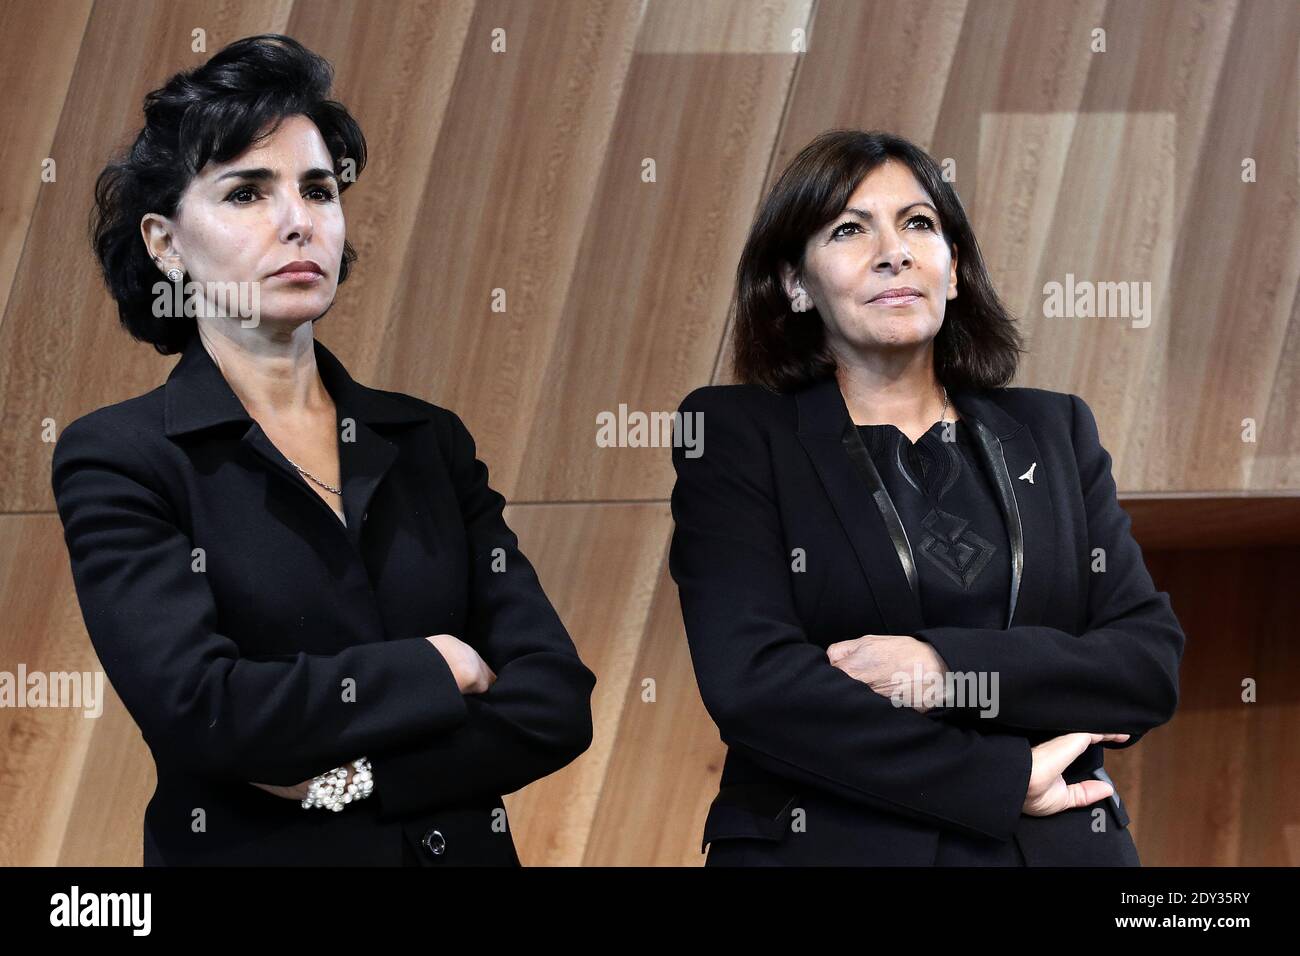 Paris' mayor Anne Hidalgo and former minister Rachida Dati take part in the inauguration of the new Eiffel Tower glass floor area in Paris on October 6, 2014. The Eiffel Tower is inaugurating today a new glass floor that is turning the heads of the millions of tourists who flock to Paris's best-known landmark every year. Photo by Stephane Lemouton/ABACAPRESS.COM Stock Photo